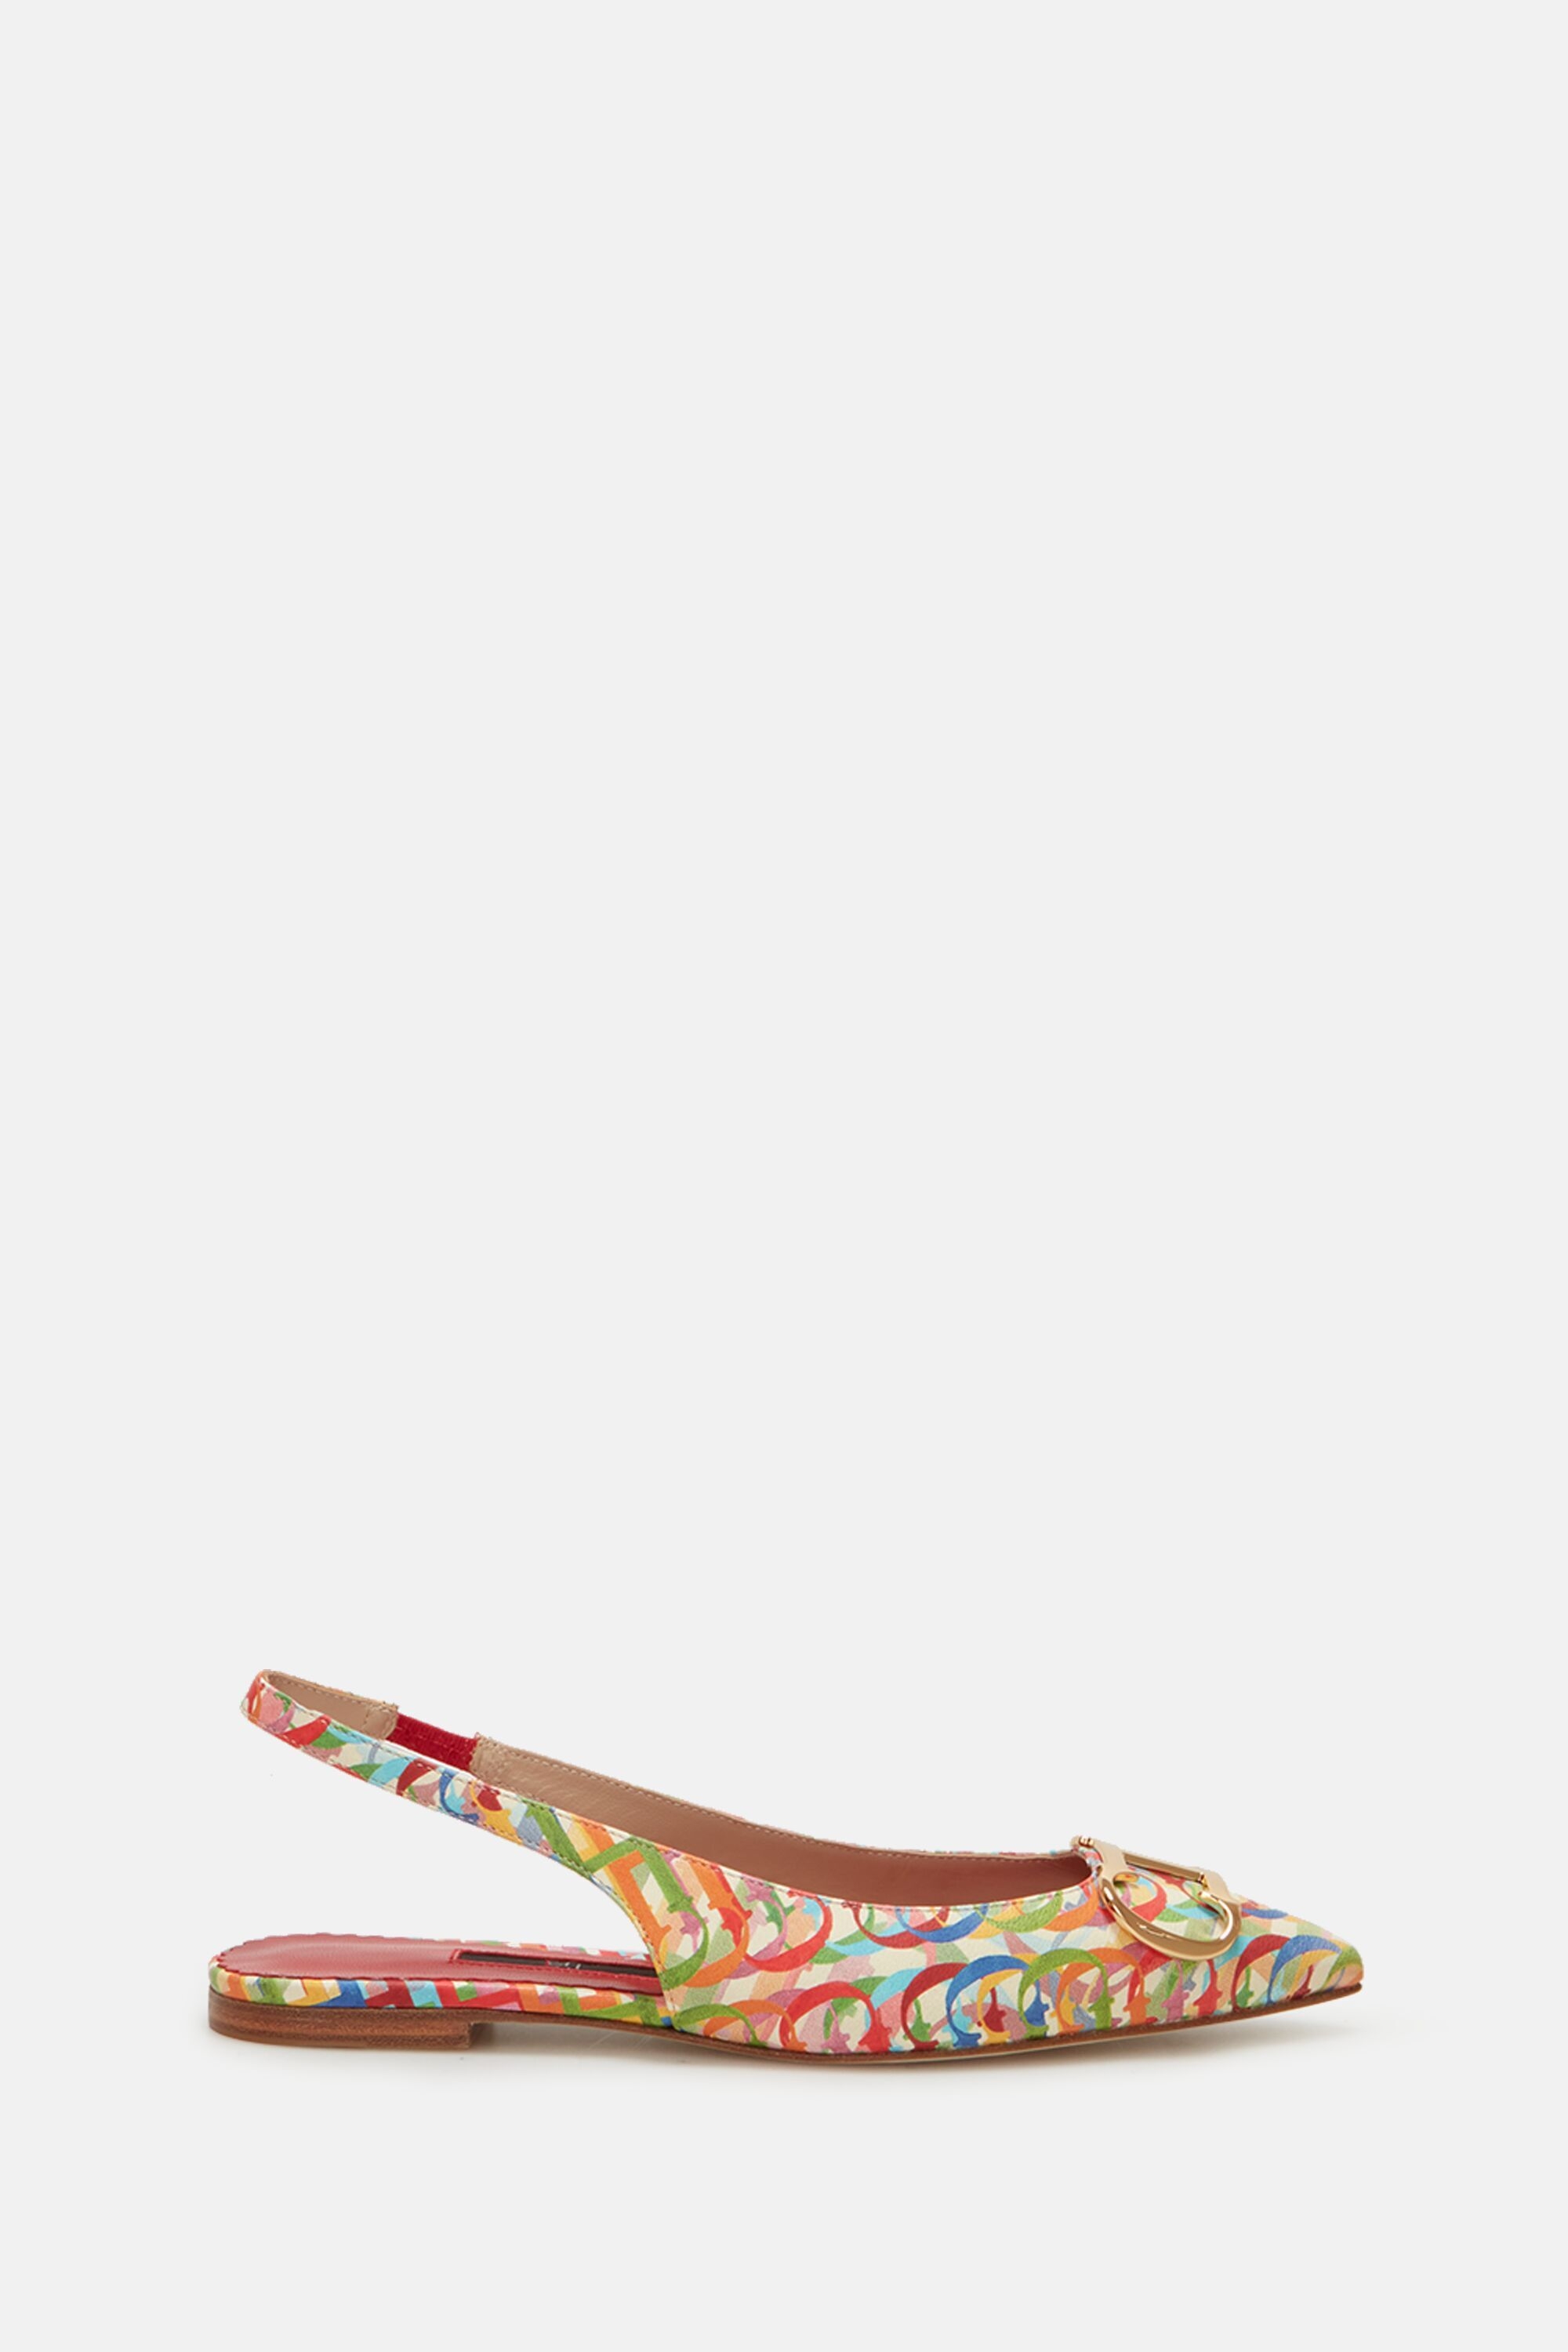 Initials Insignia printed leather slingback point-toe flats